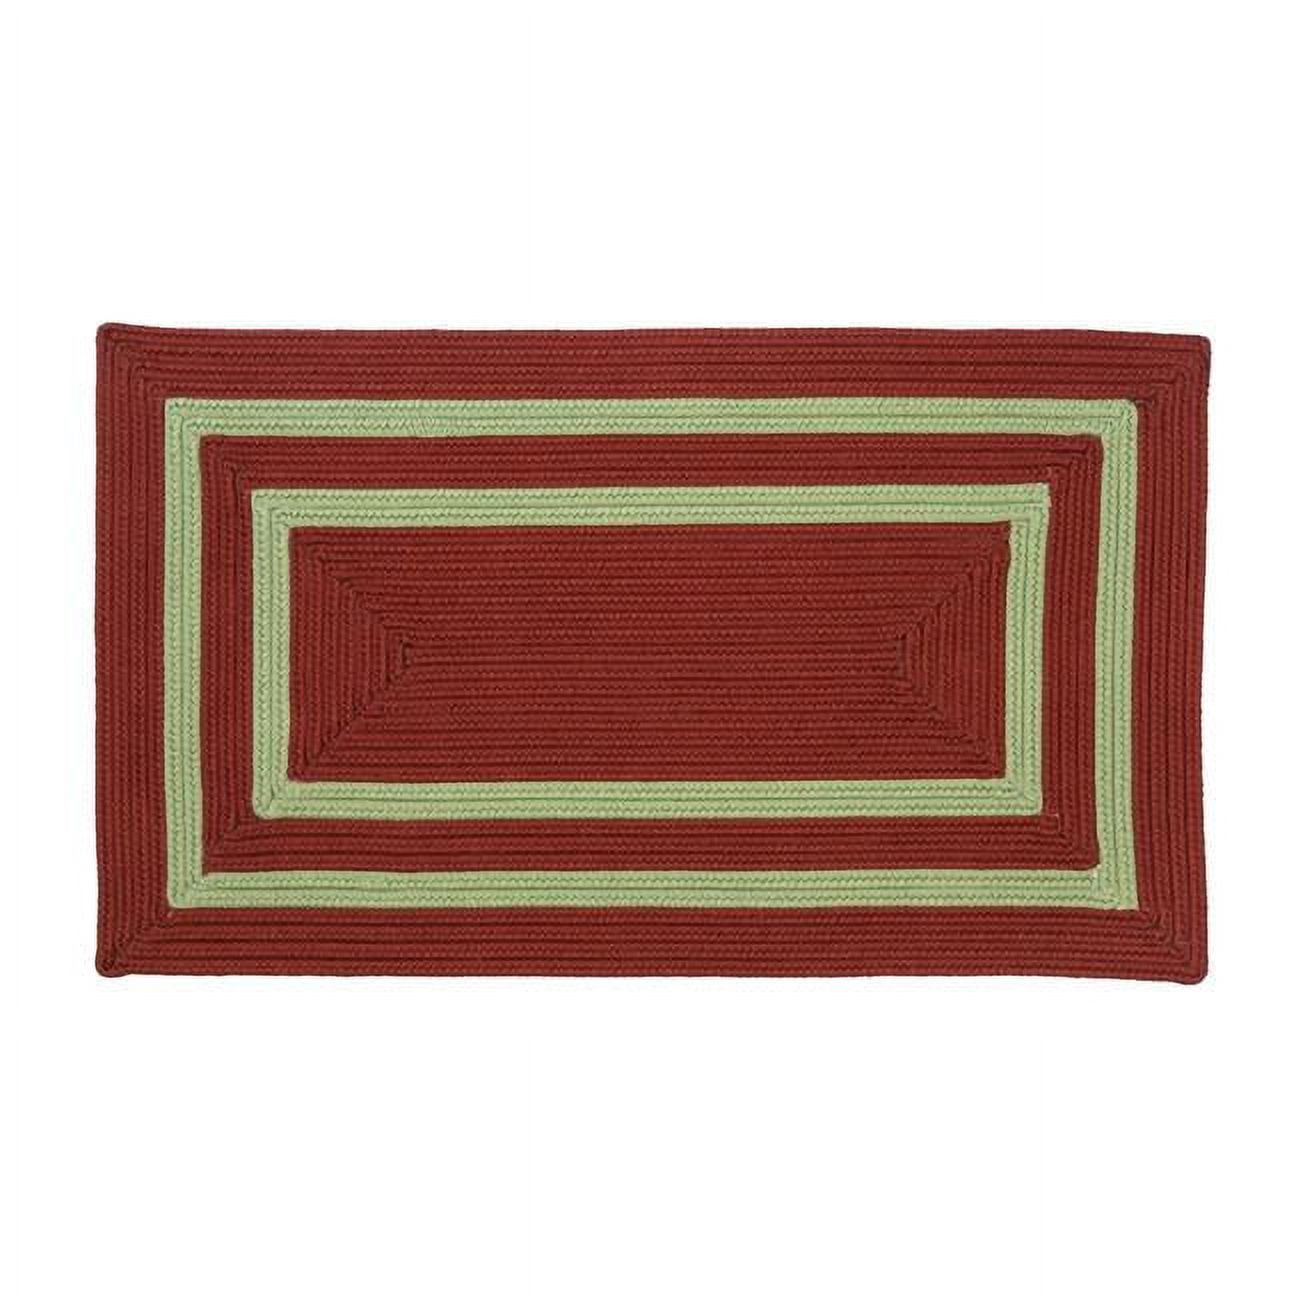 Designs-Done-Right 42 x 66 in. Double Border Christmas Rectangle Rug - Red & Green